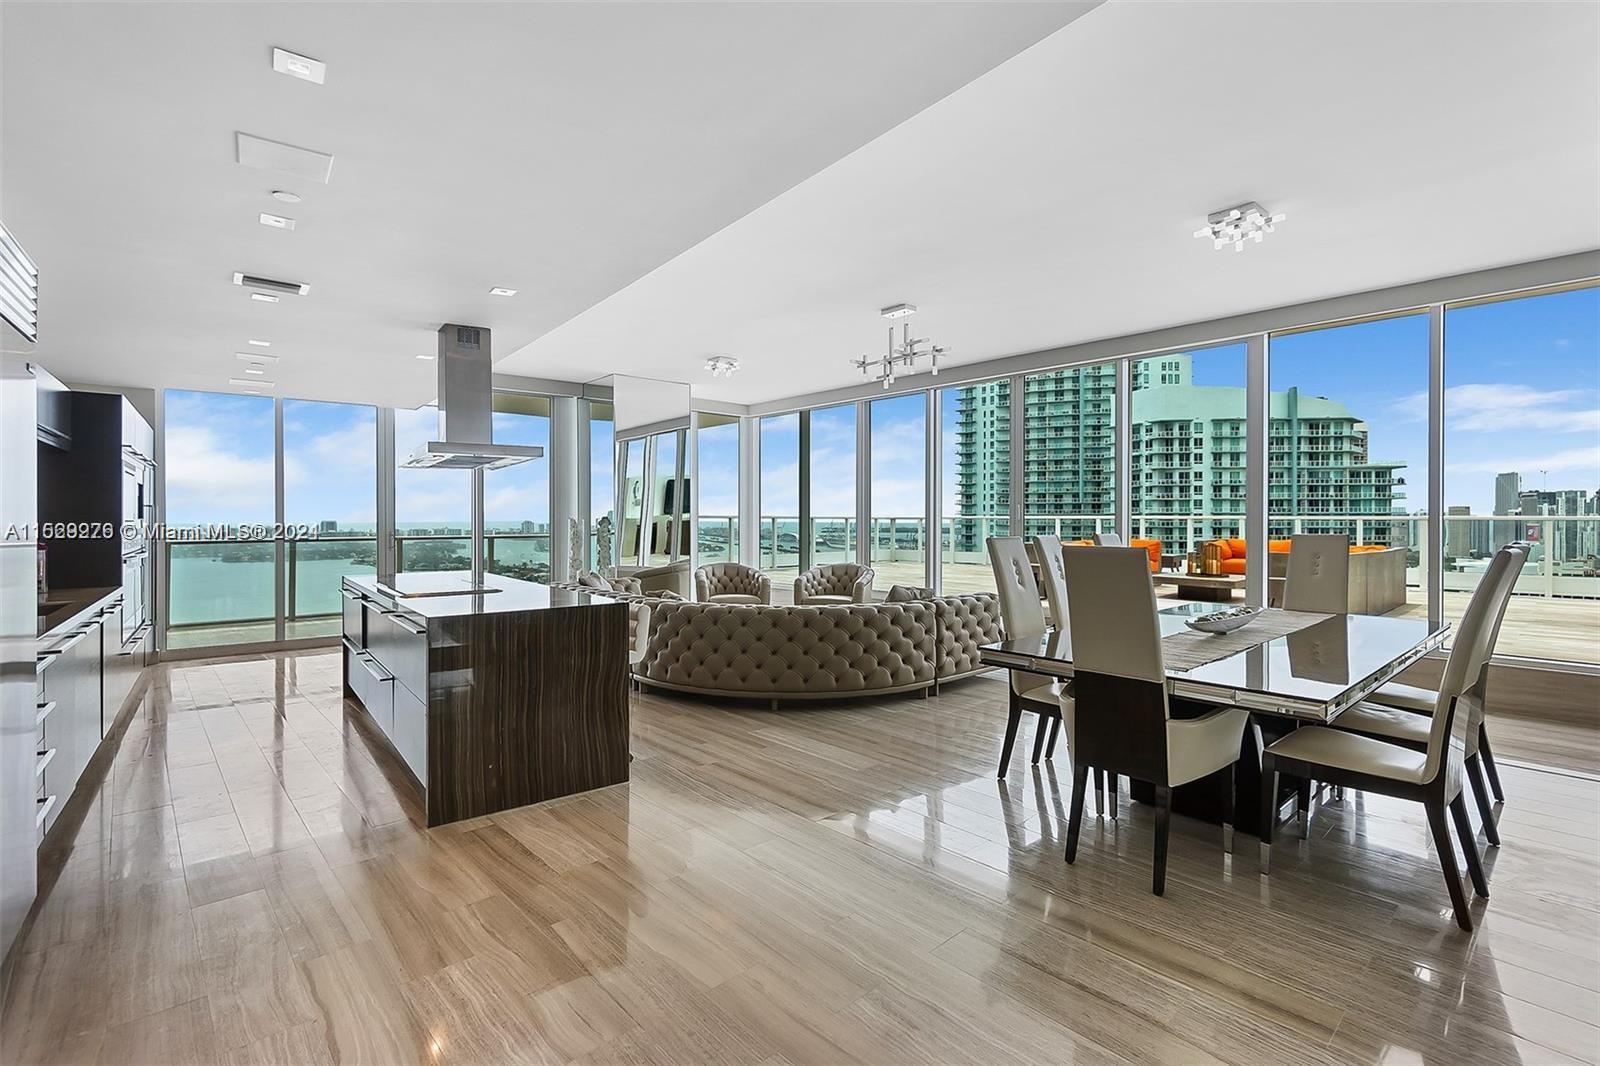 An absolute one of a kind designer Penthouse perched over Biscayne bay with sweeping 270 degree views from the Miami Beach shoreline to the downtown skyline; from Coconut Grove to the Hard Rock. In a world of cookie cutter Miami apartments, this glass jewel box stands alone. With 2,700 sqft of interior space and over 2,500 sqft of sprawling terrace directly off your great room, it is a unicorn that is seldom seen. Imagine the beauty of opening your glass sliders to an immense outdoor living space replete with a jucuzzi hot tub and outdoor kitchen. A home in the sky filled with designer finishes, a spectacular glass primary bath, oversized walk in closets and a gorgeous chefs kitchen and entertainment island. It's one of those spaces that must be experienced in person to be believed